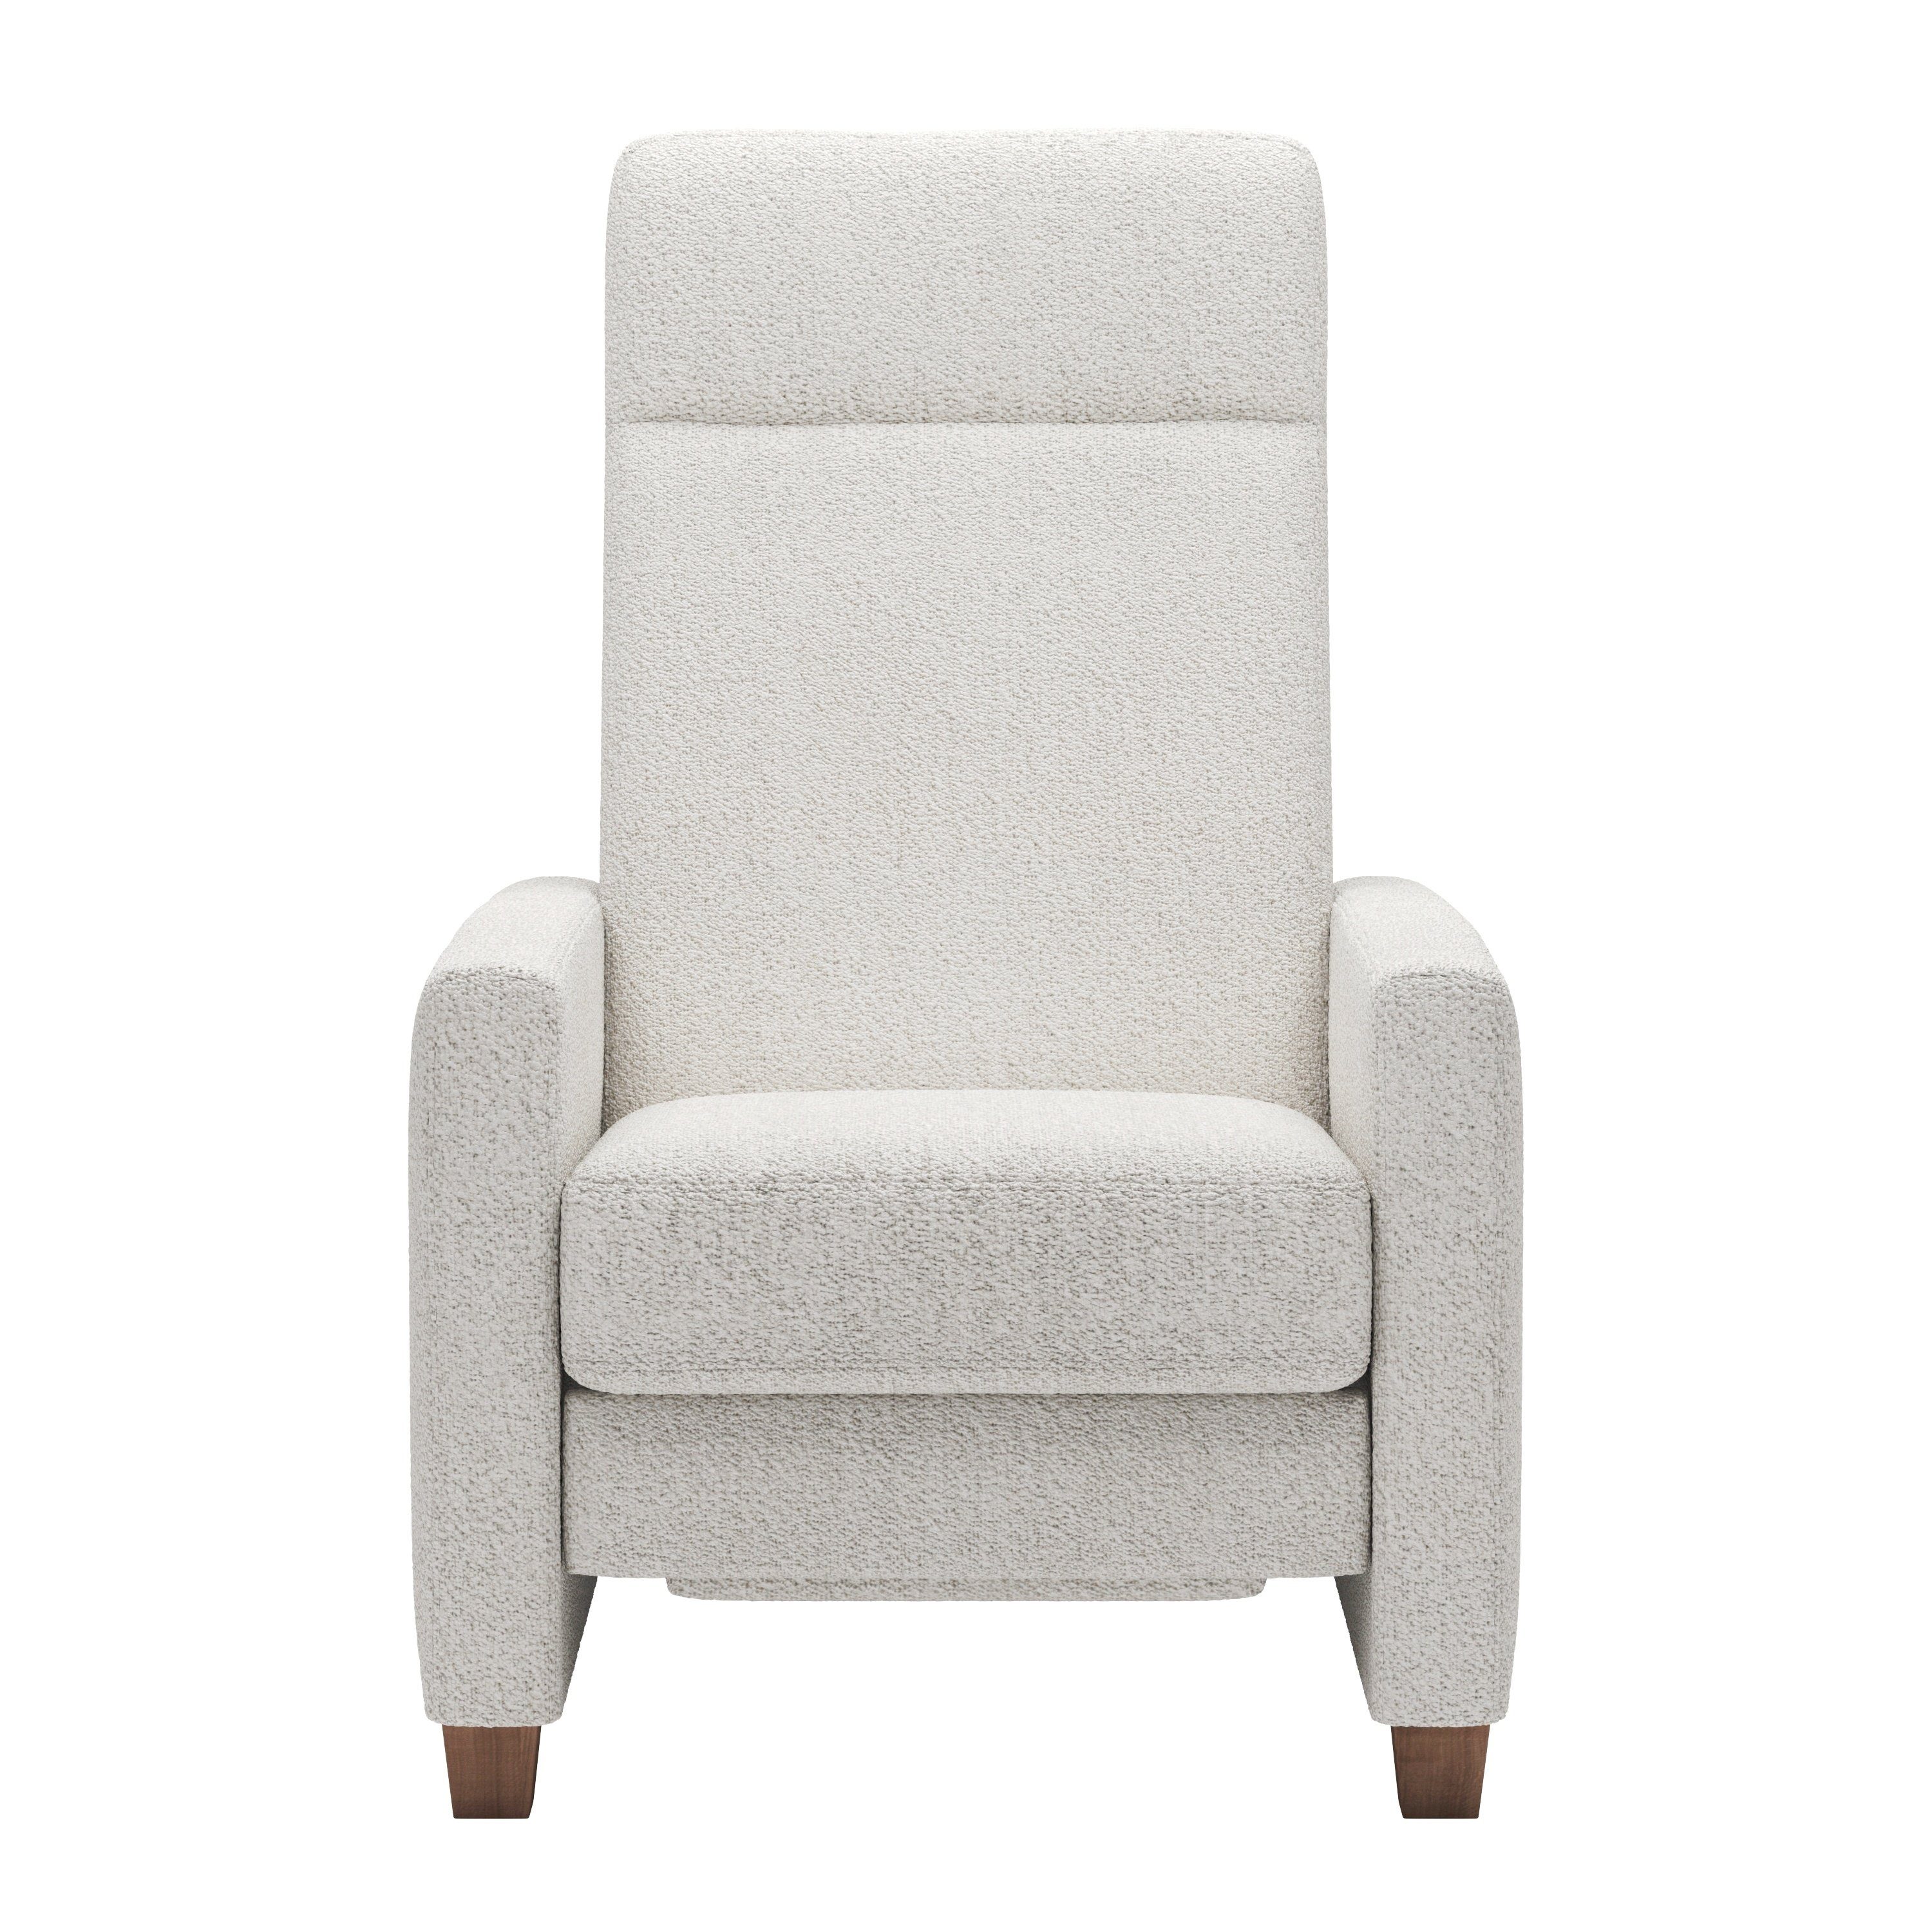 Home affaire Relaxfauteuil Hambers